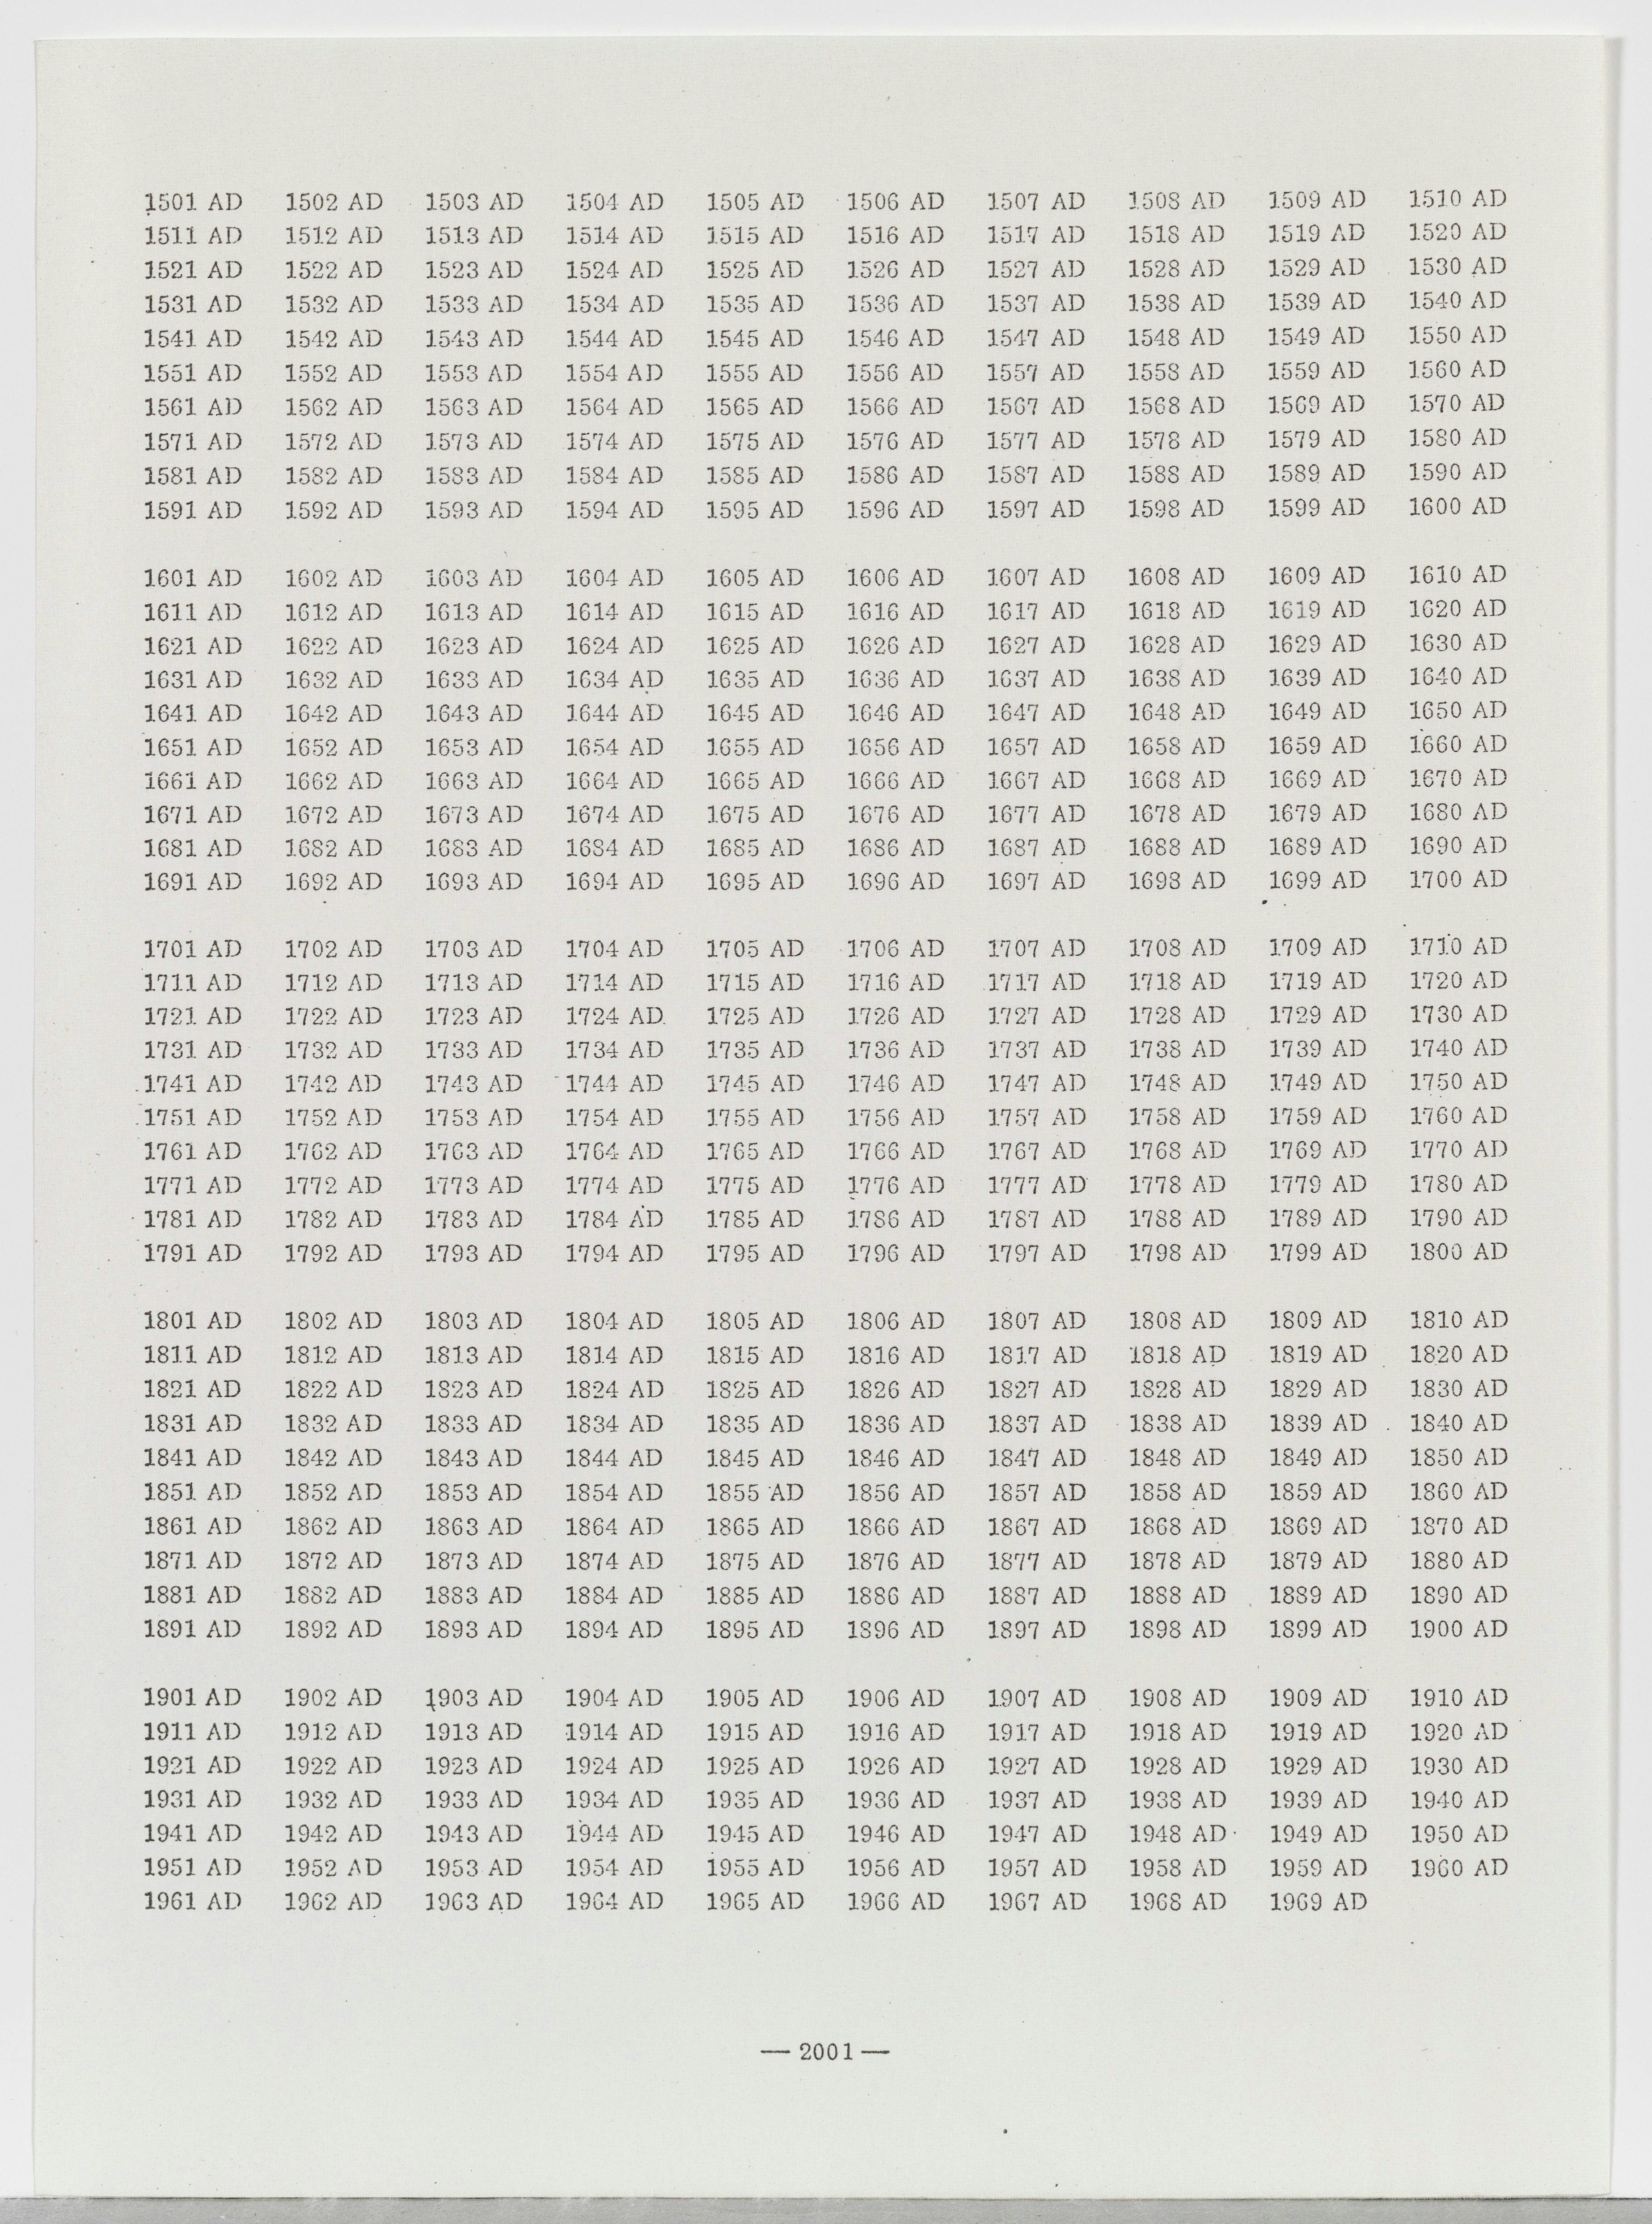 Page 2001 from On Kawara’s book, One Million Years, dated 1970-1971.